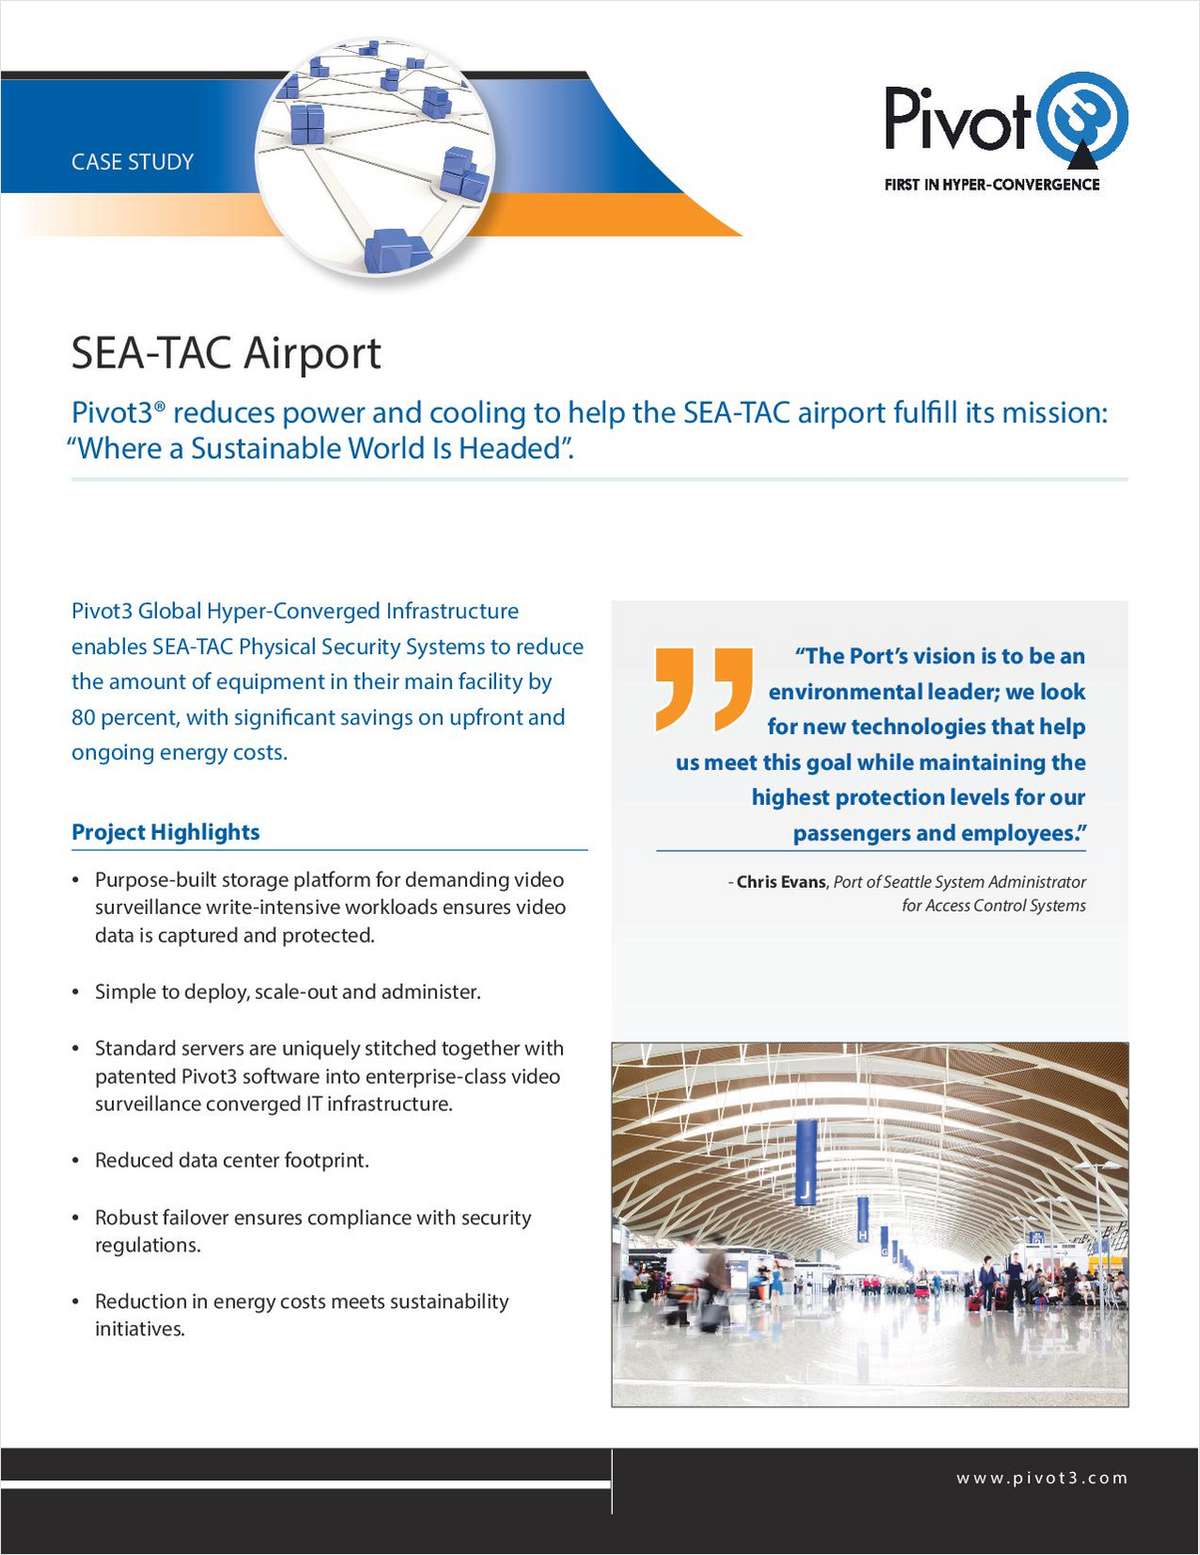 SEA-TAC Airport Enterprise Storage Strategy Fosters Sustainability